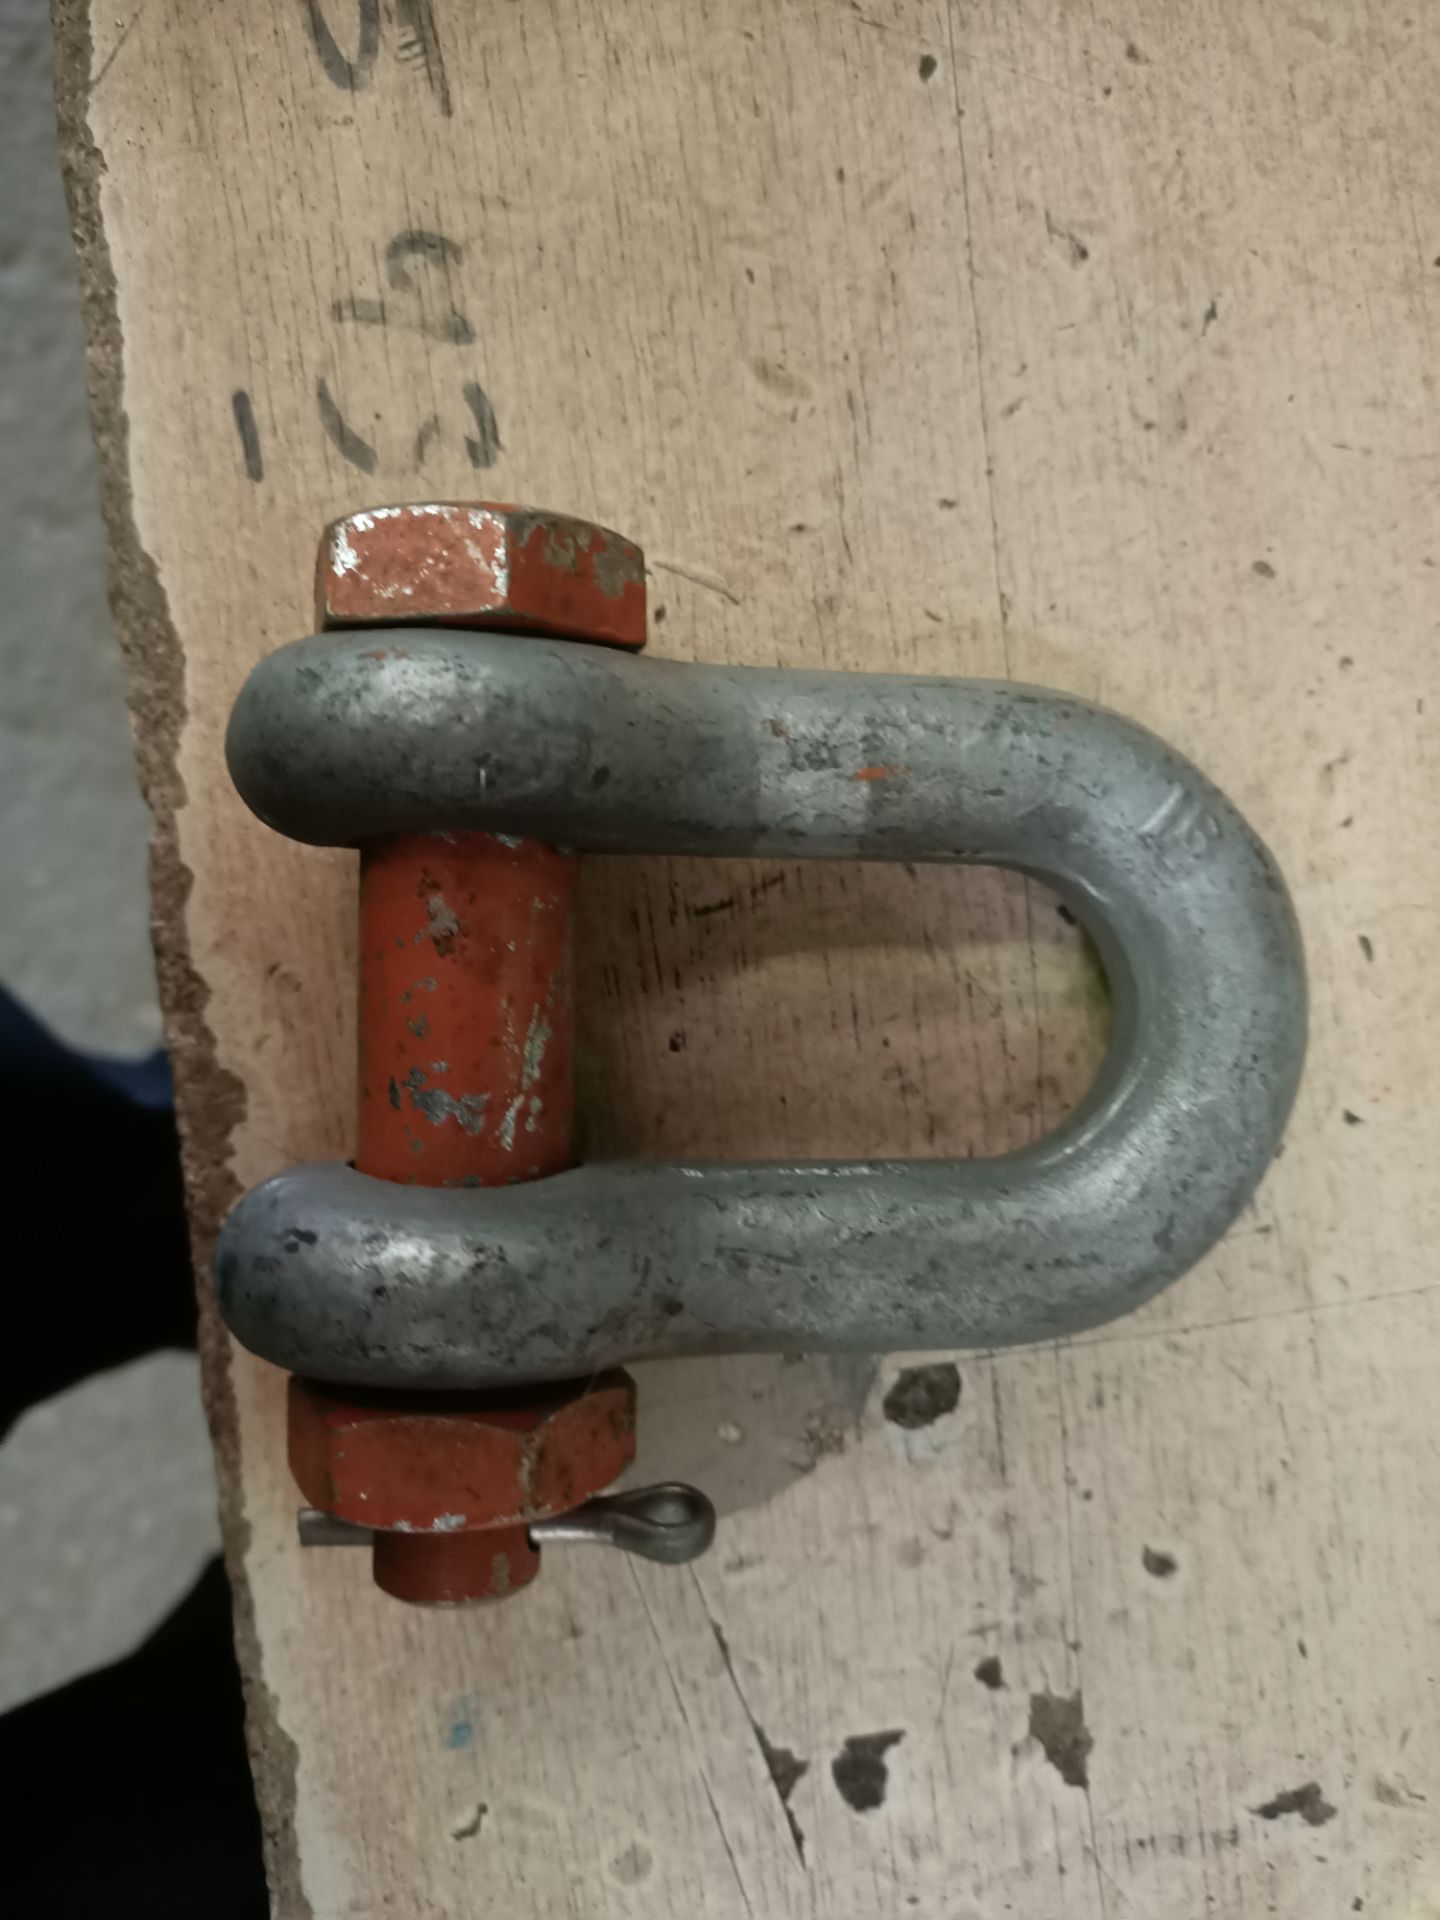 3 X 8.5 Ton Orange Pin Safety Dee Shackles (Opsad8.5) - Image 2 of 2